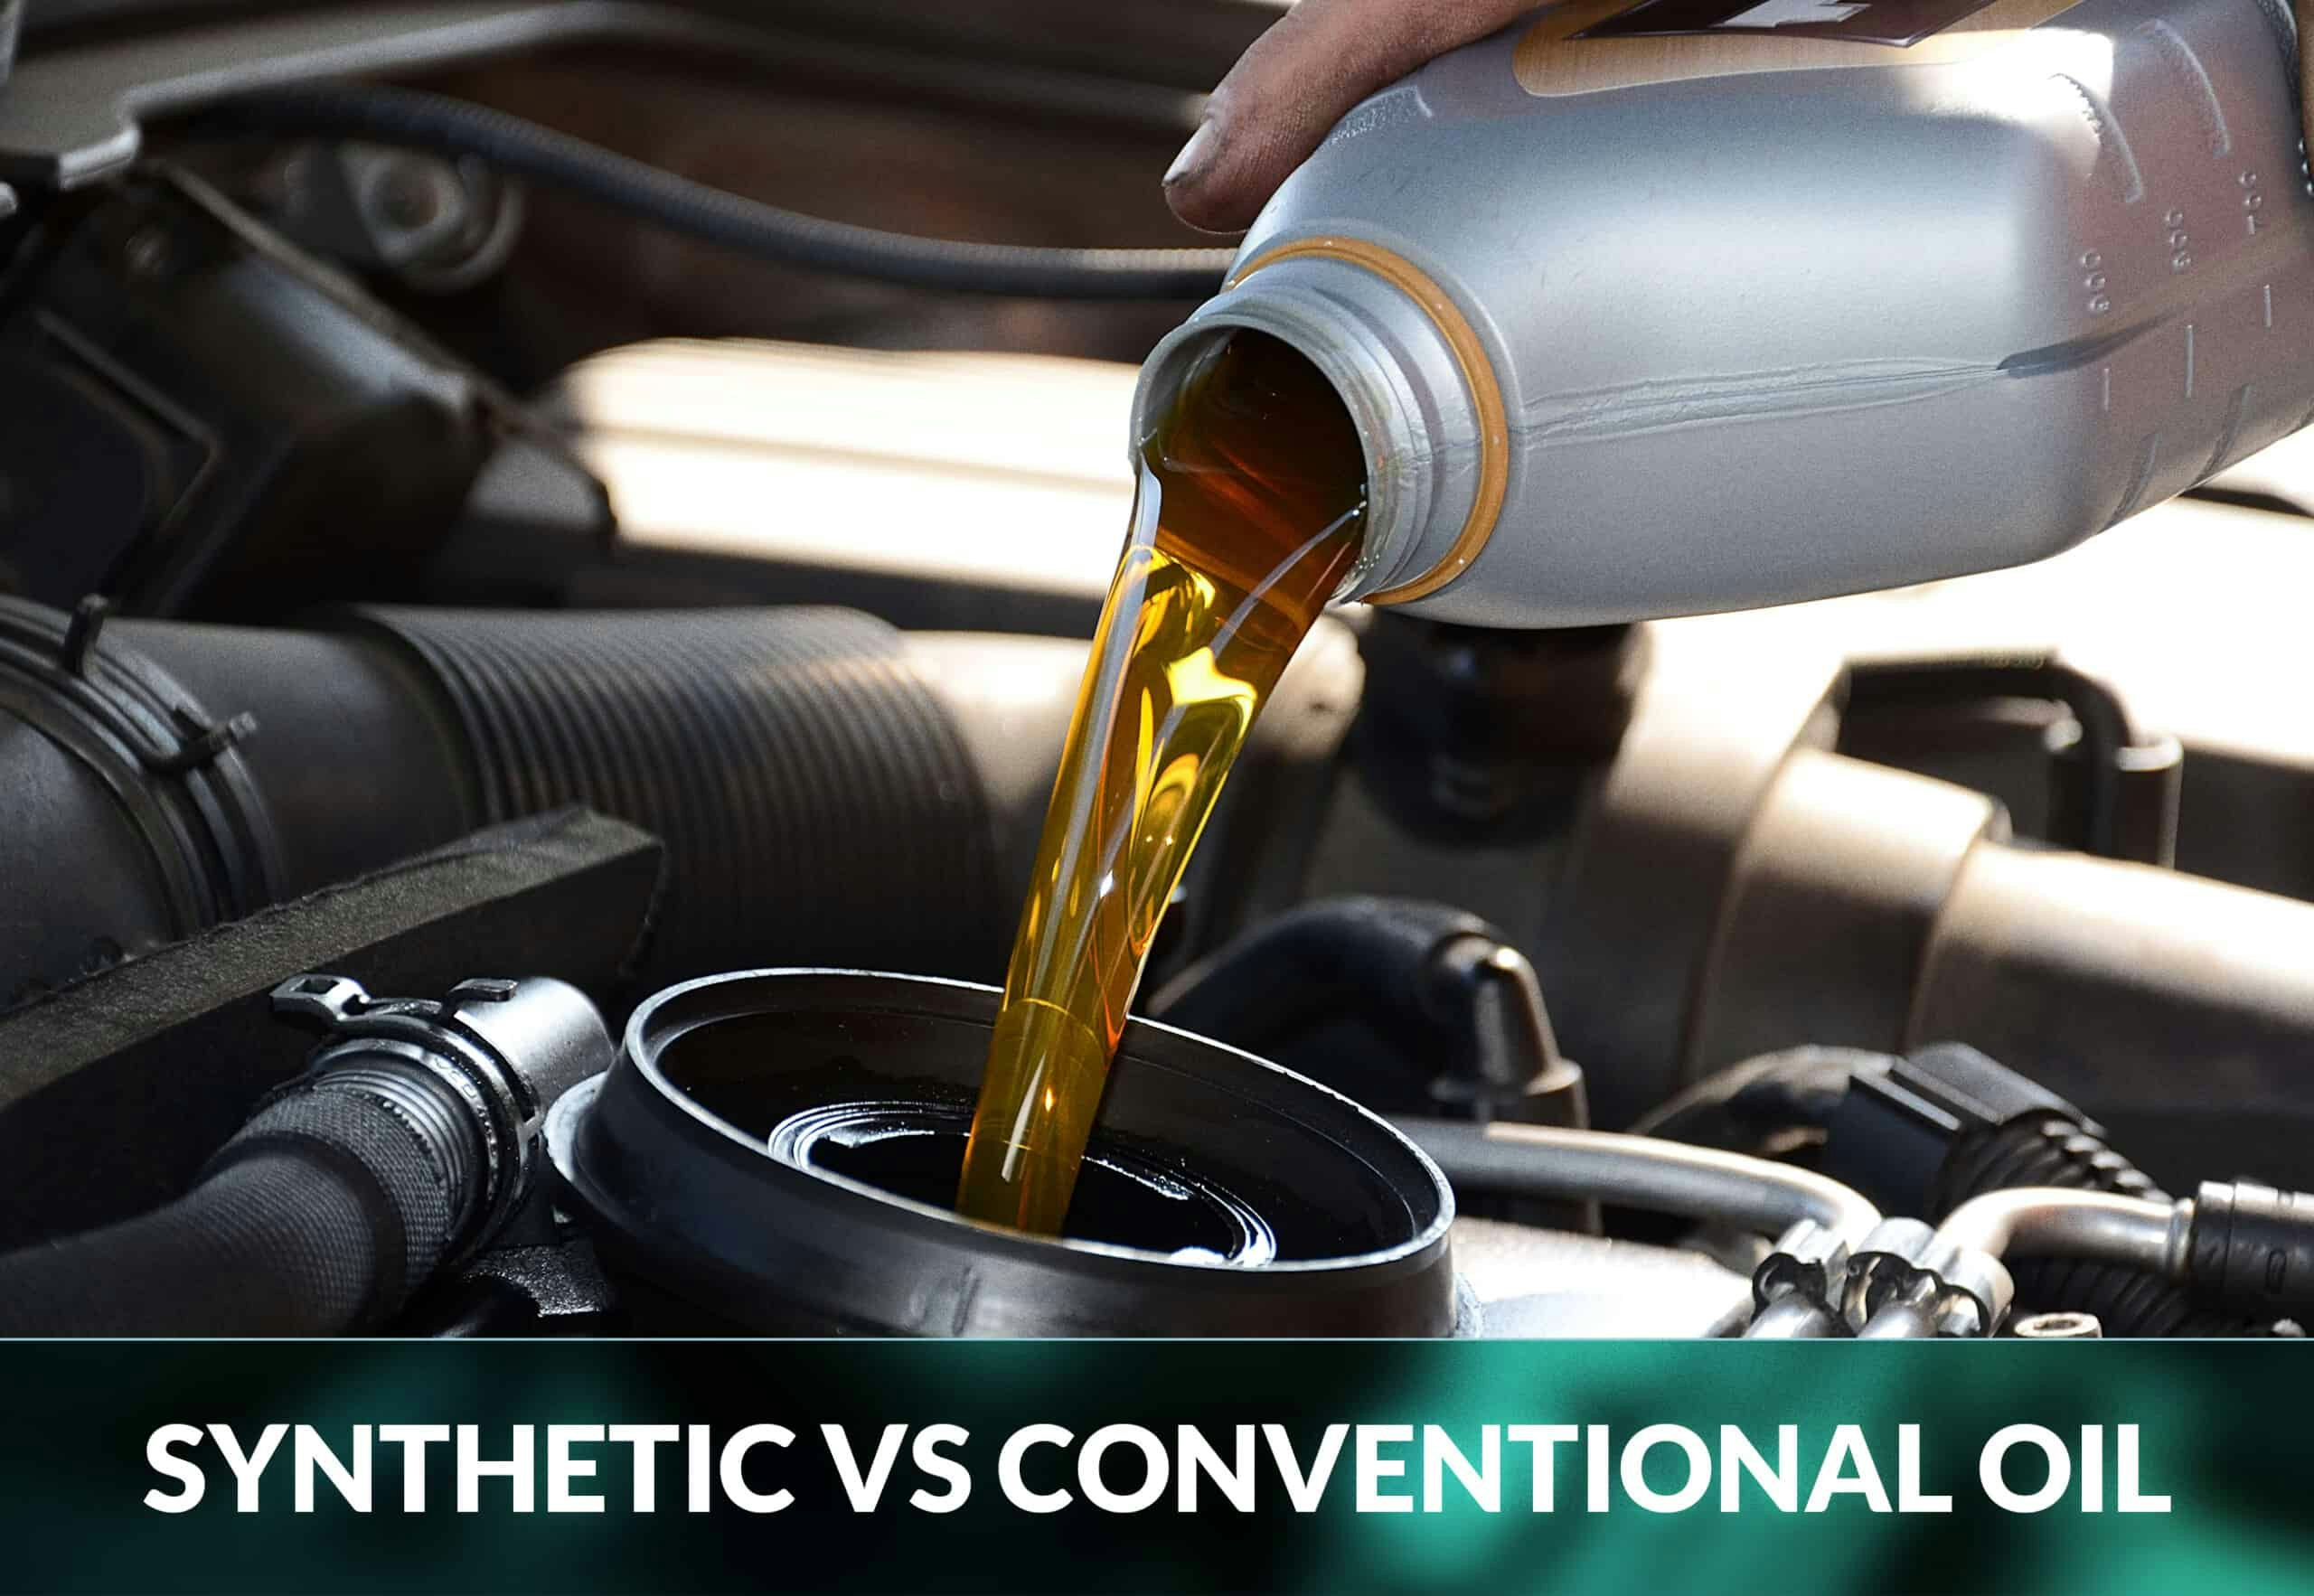 SYNTHETIC VS CONVENTIONAL OIL